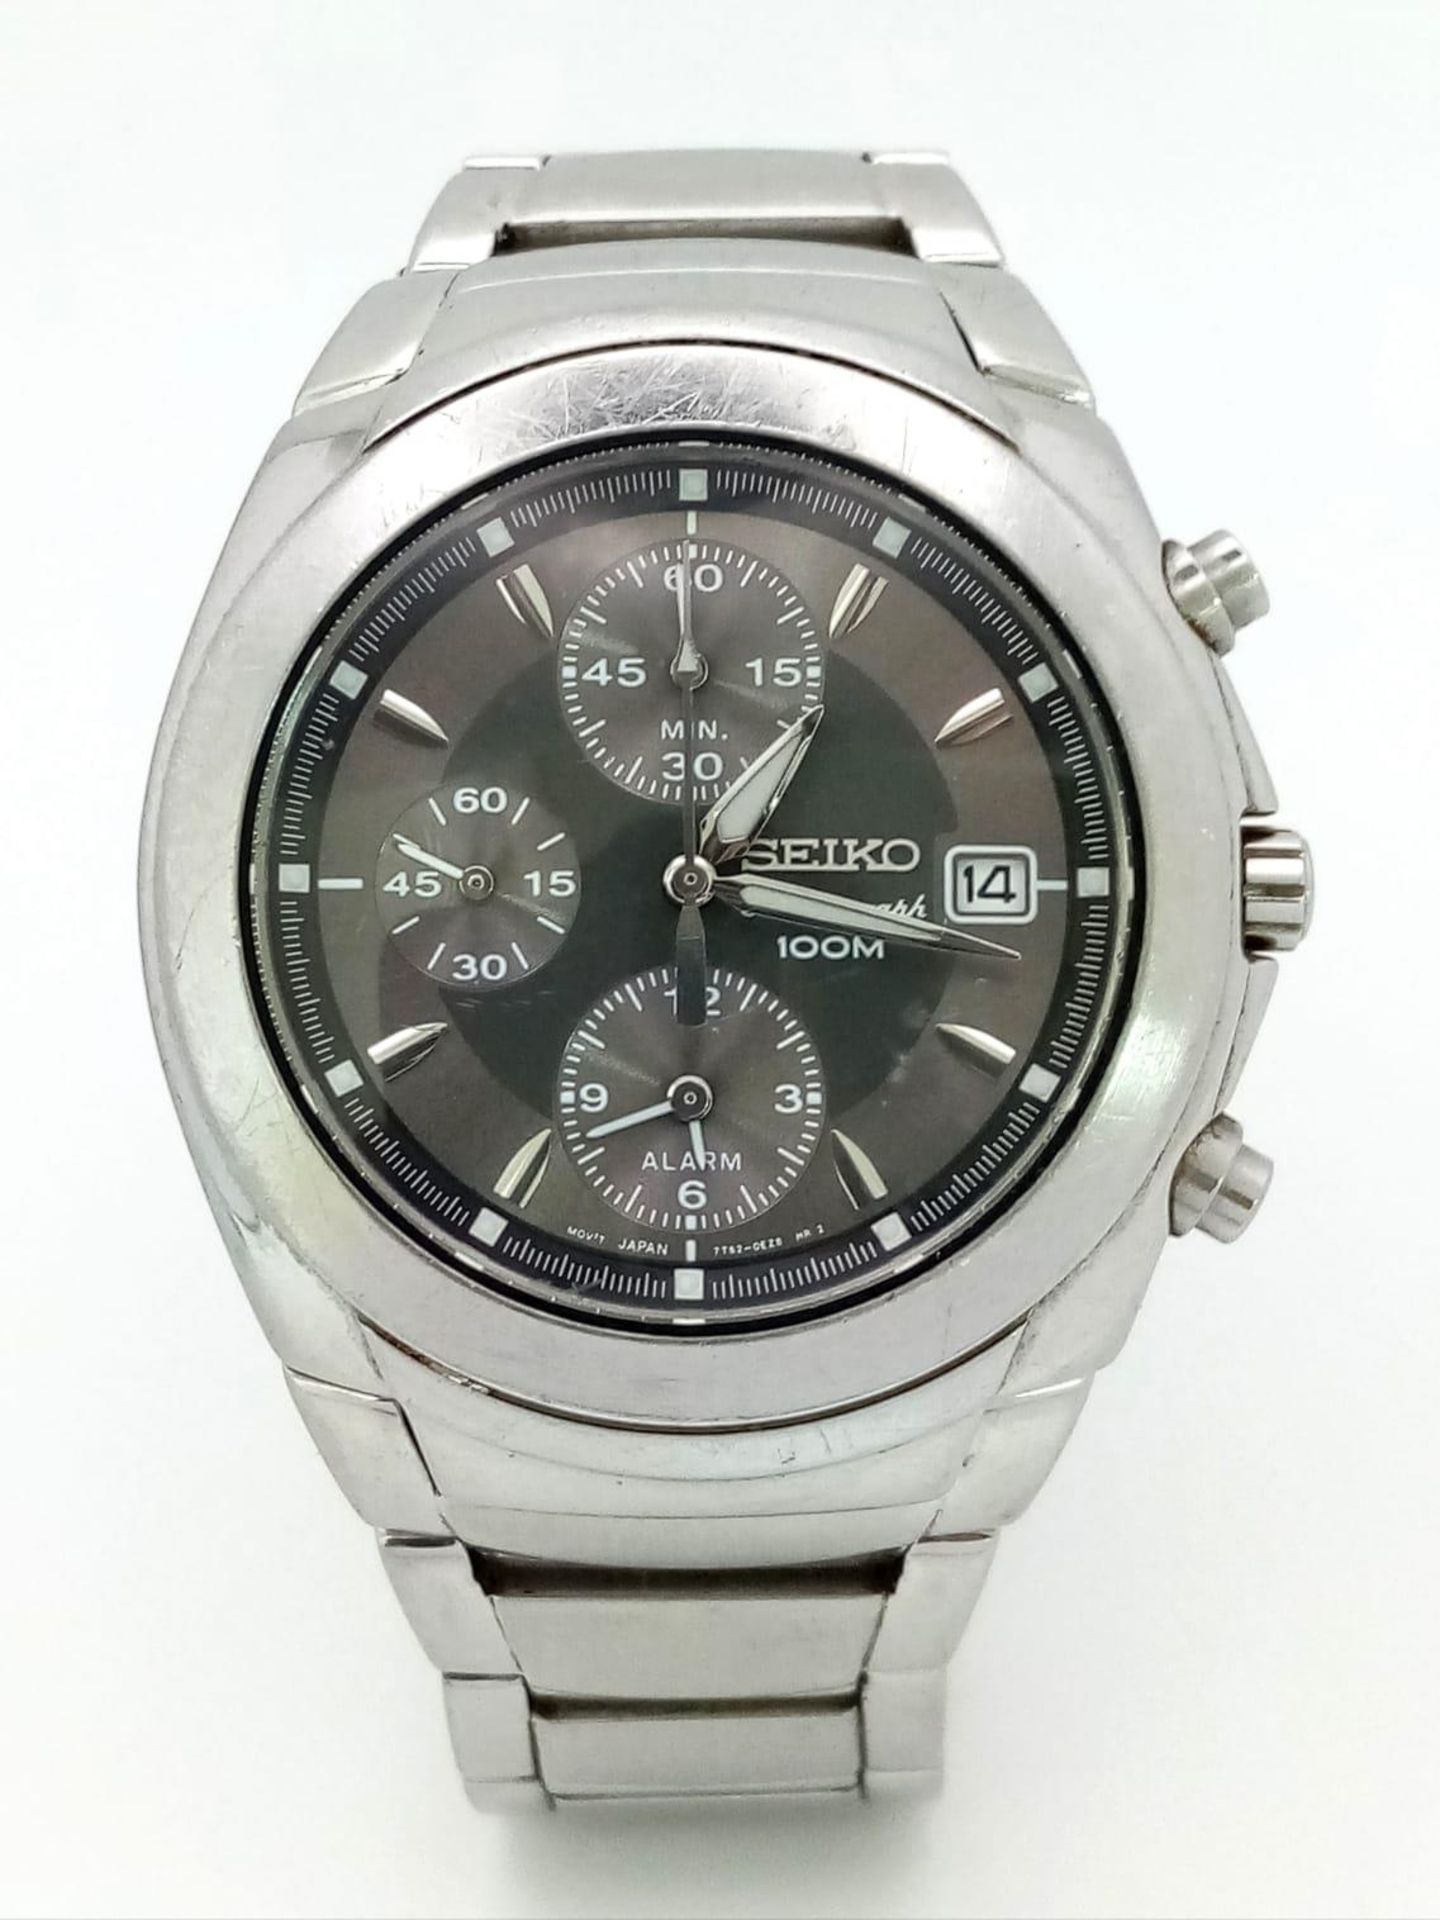 A Seiko Chronograph Quartz Gens Watch. Stainless steel strap and case - 40mm. Silver tone dial - Image 3 of 13